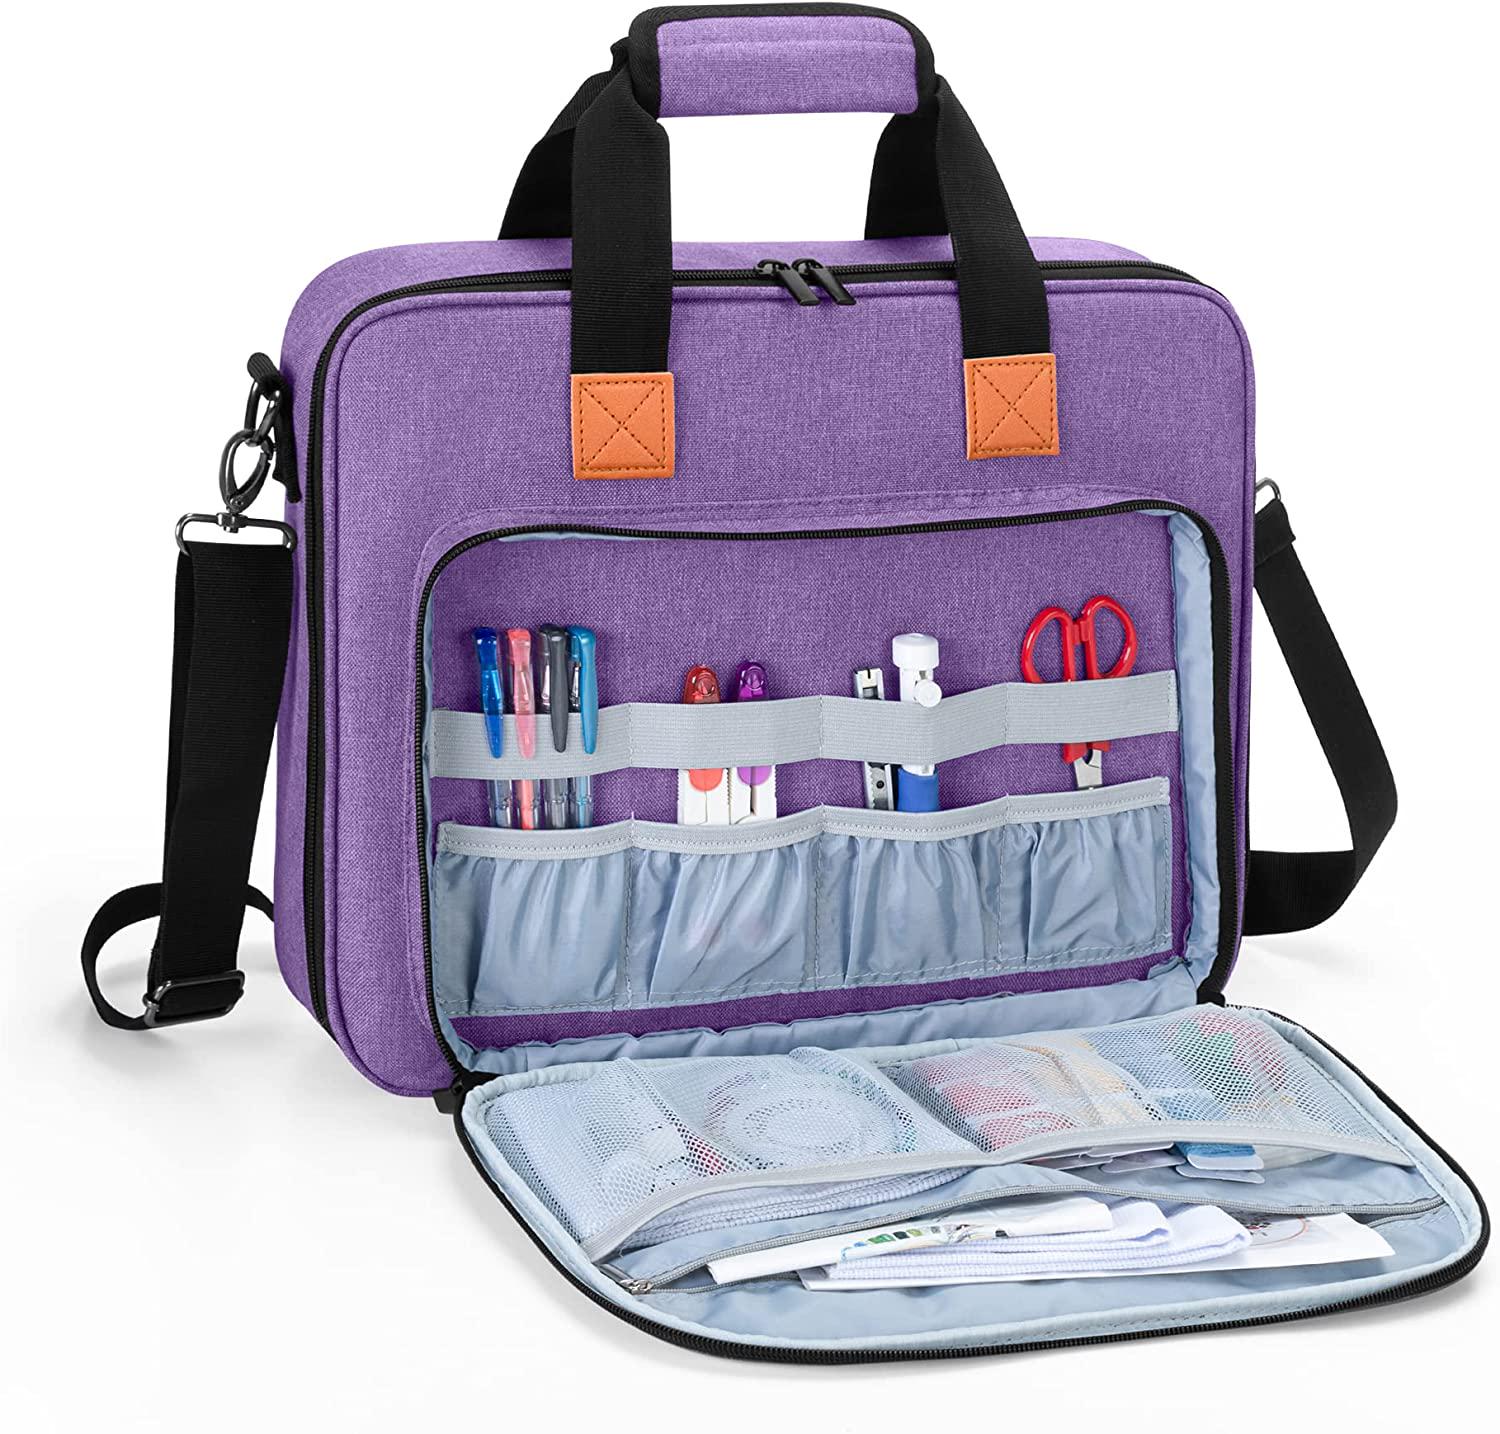 LUXJA, Luxja Embroidery Project Bag, Embroidery Kits Storage Bag (Bag Only), Purple